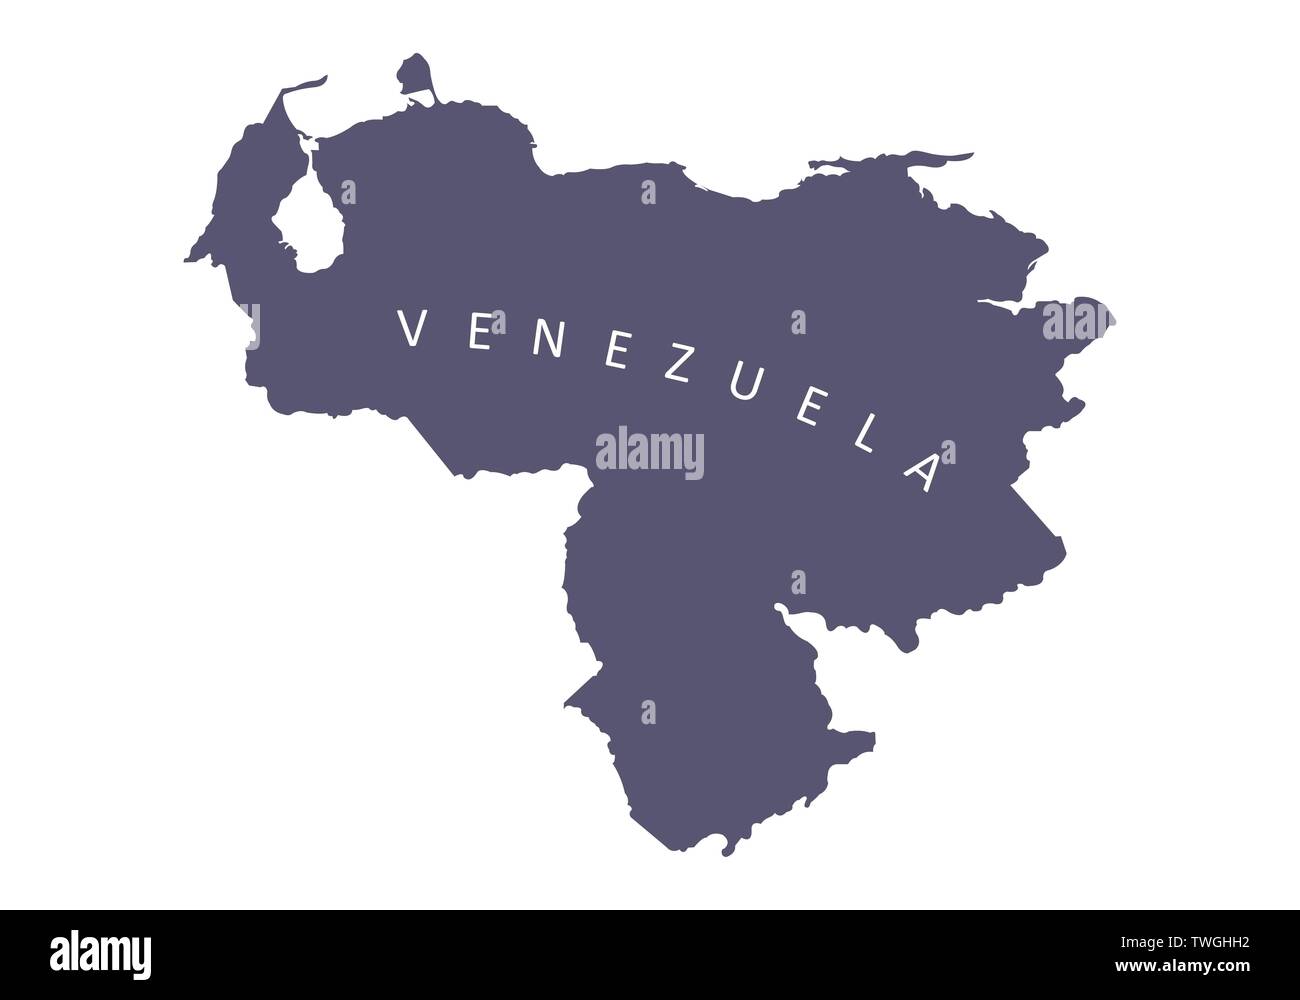 Venezuela silhouette map isolated on white background Stock Vector